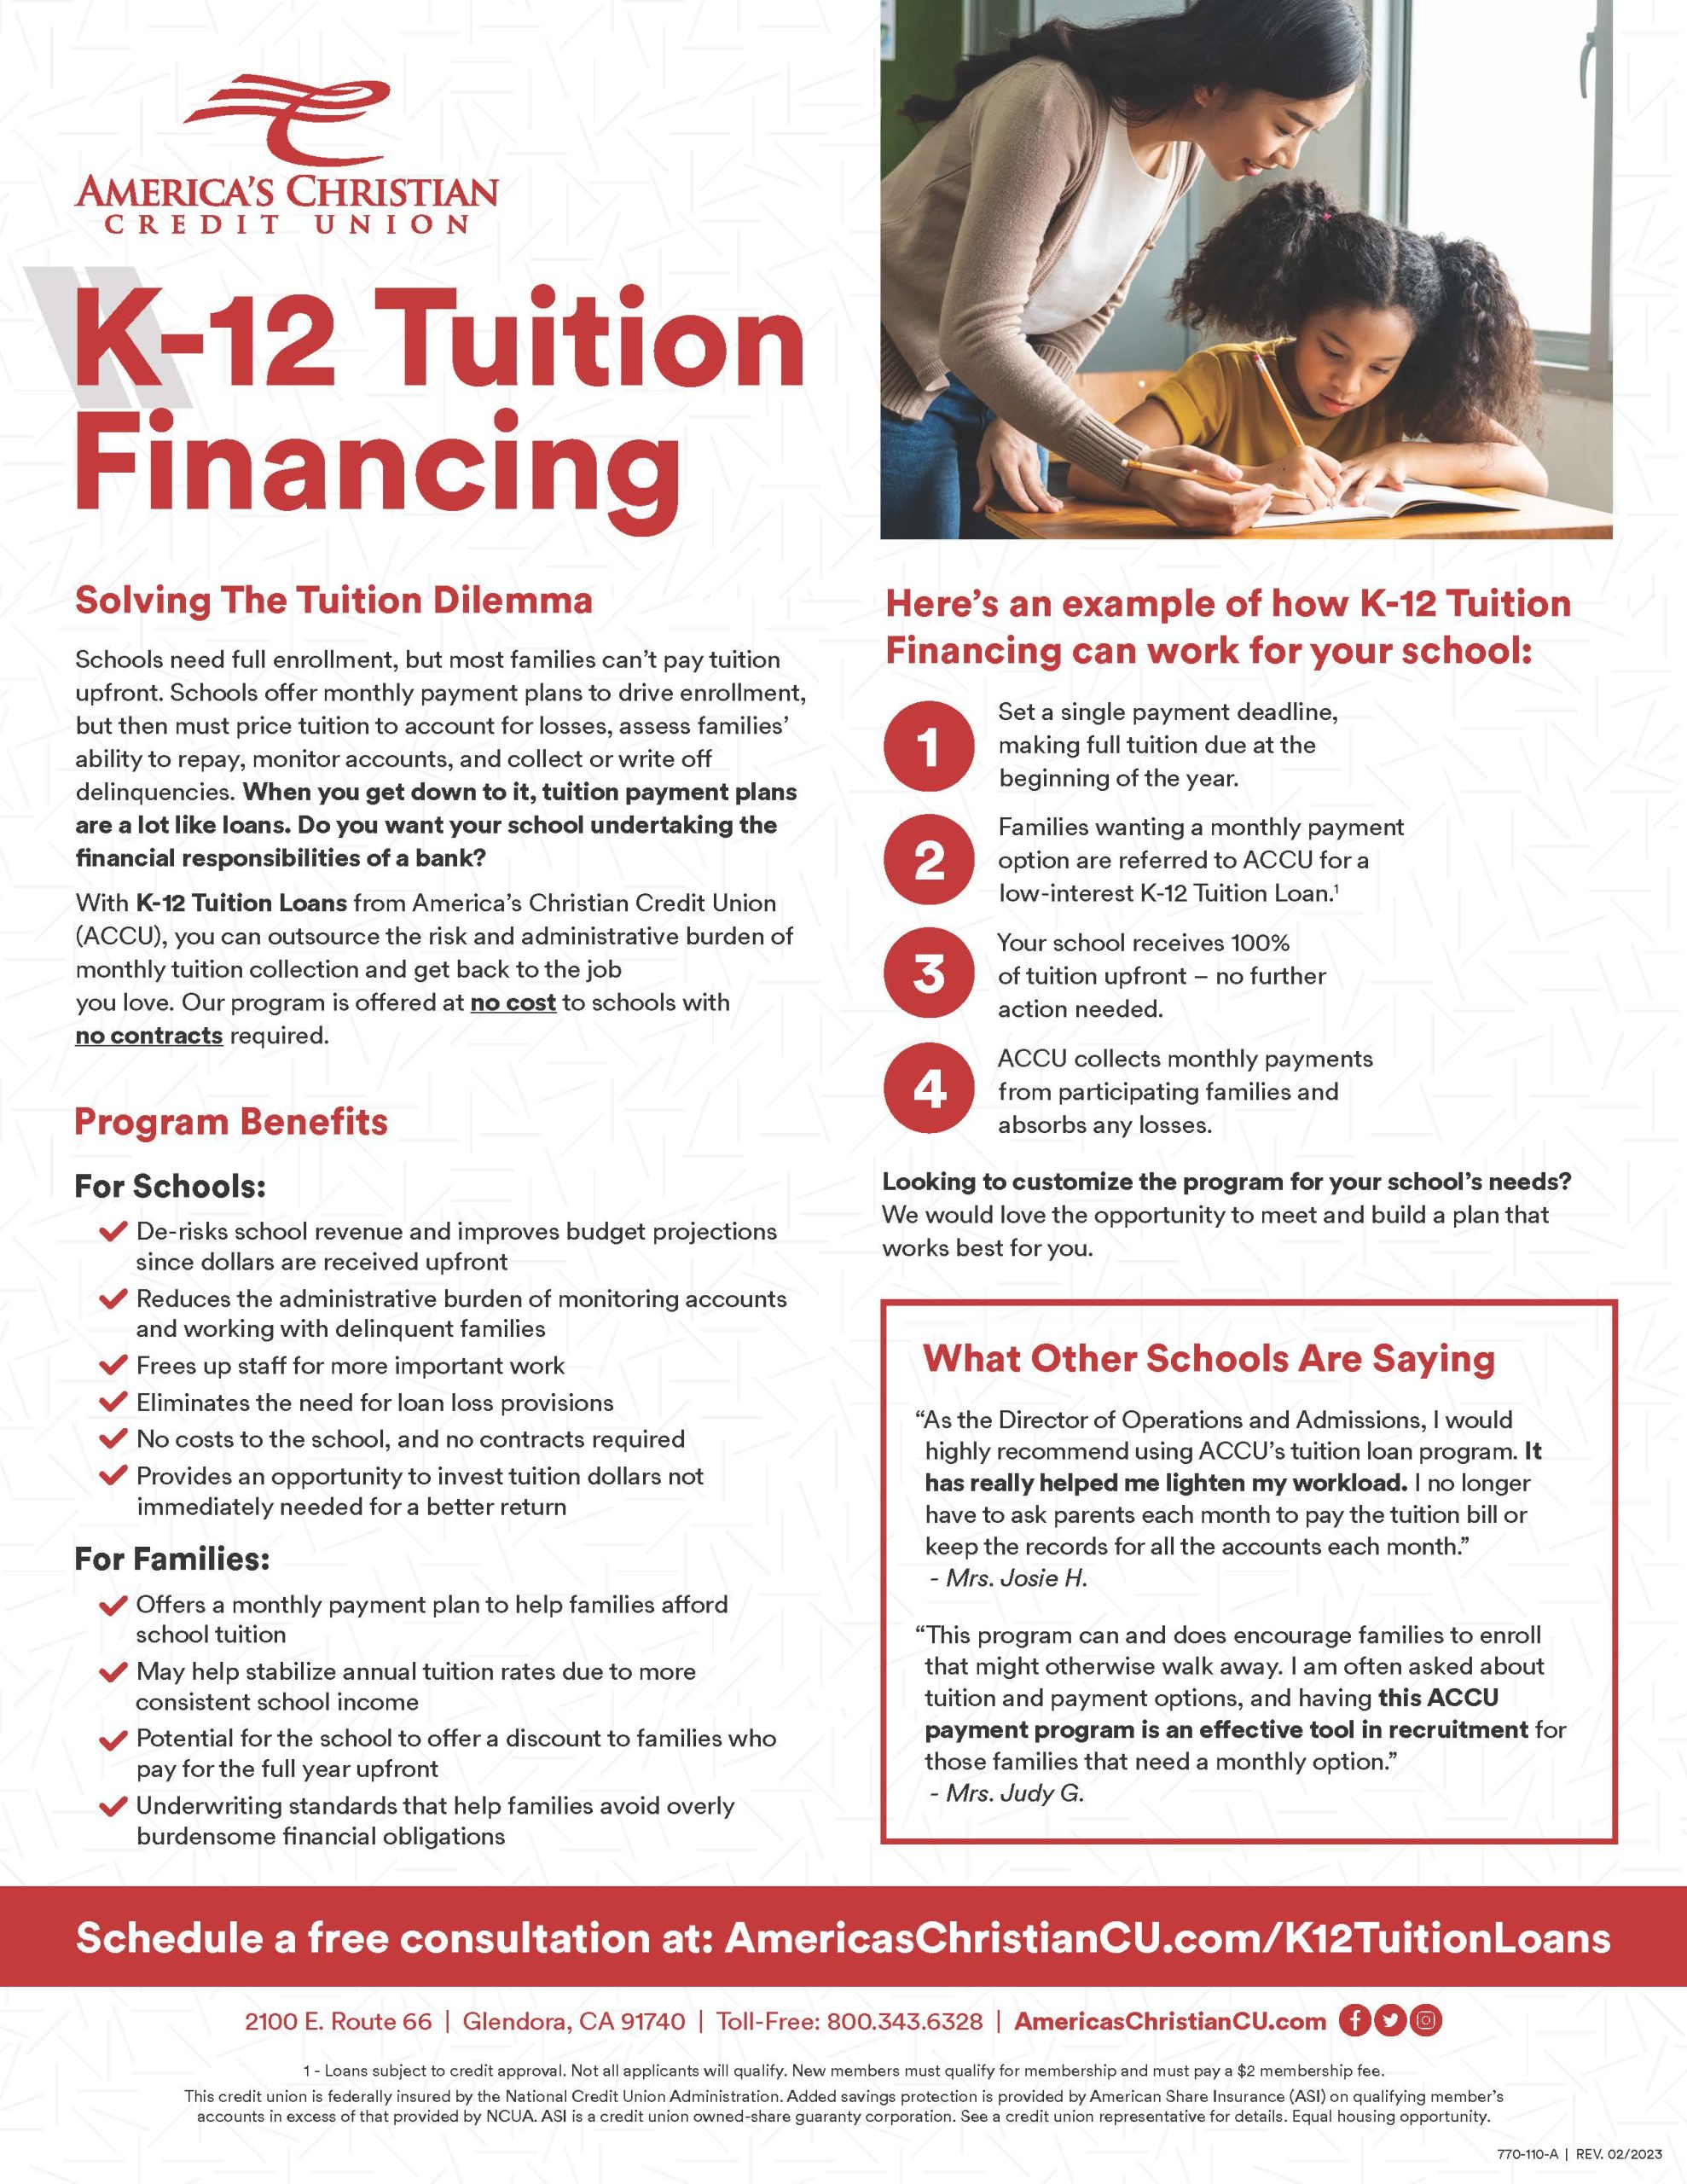 K-12 Tuition Financing